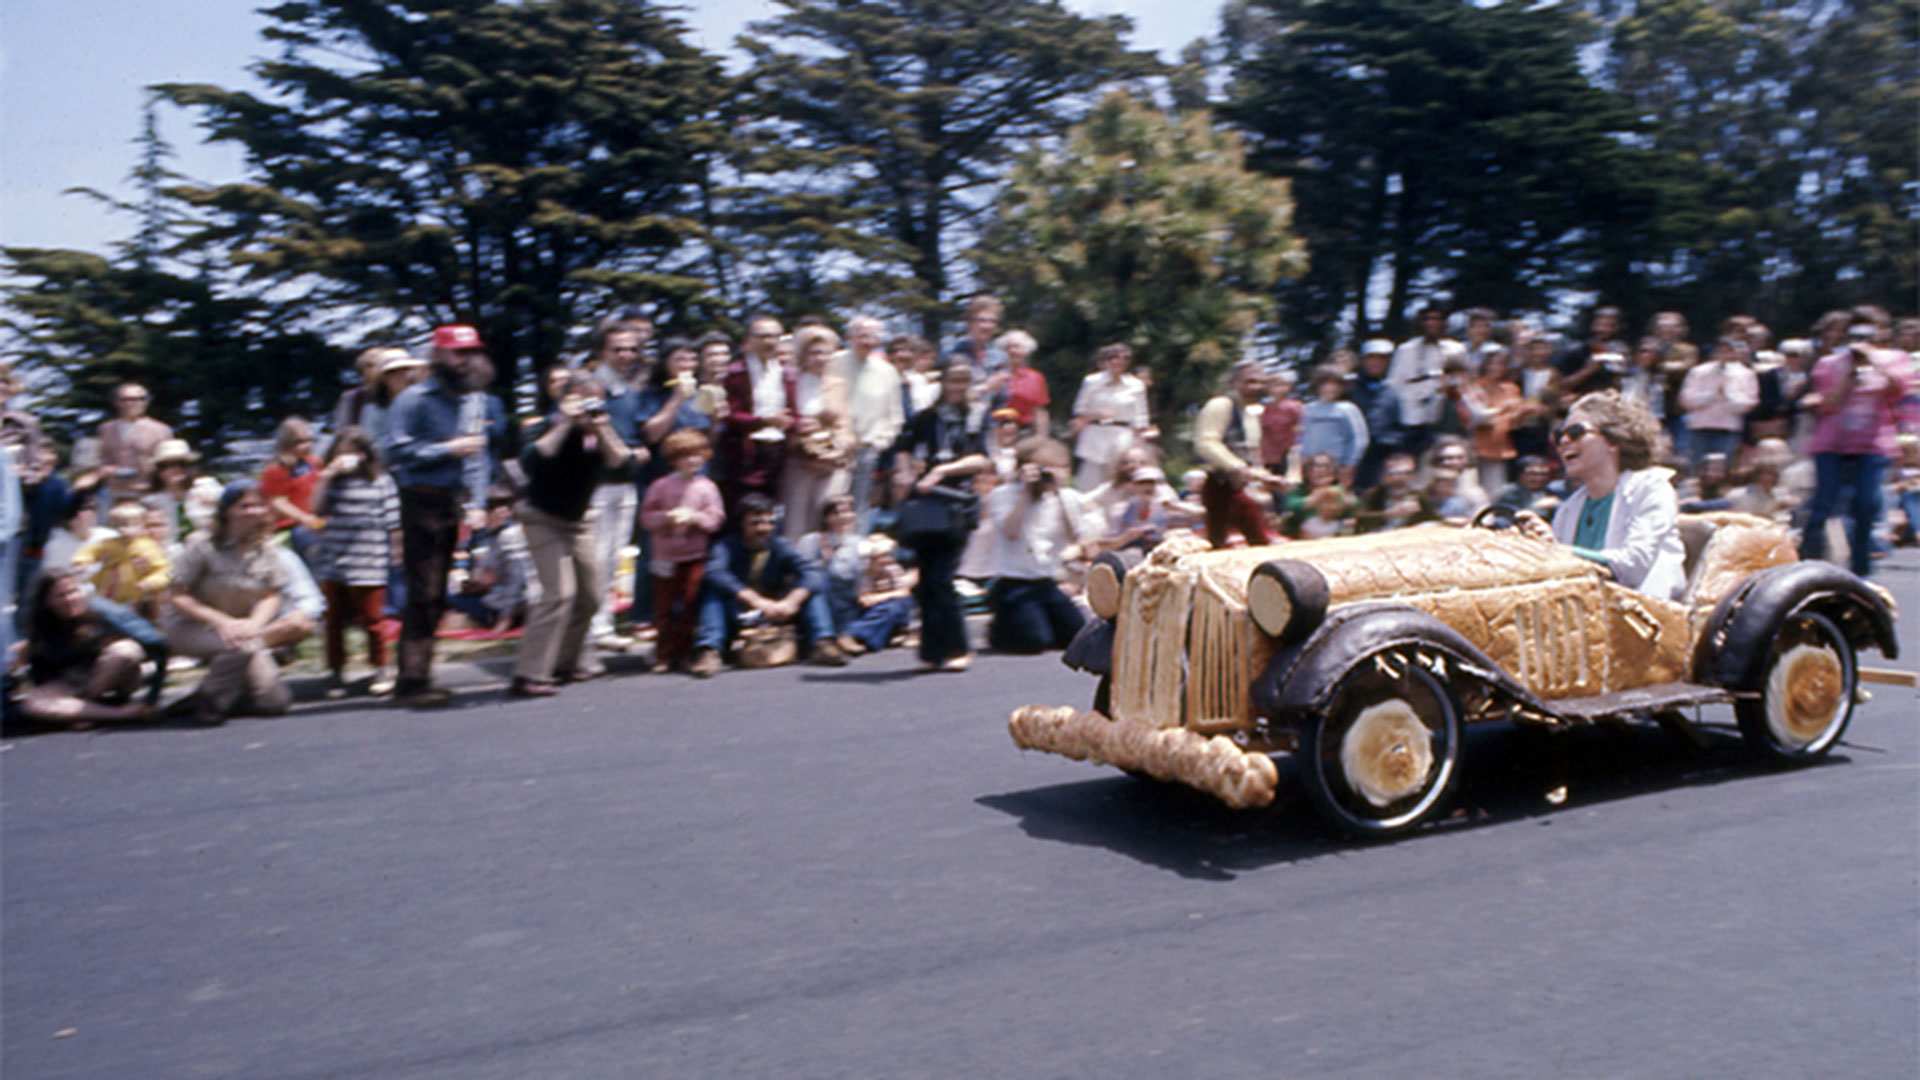 A woman in a car entirely made out of bread comes speeding down a hill. A crowd of spectators look on with trees behind them.